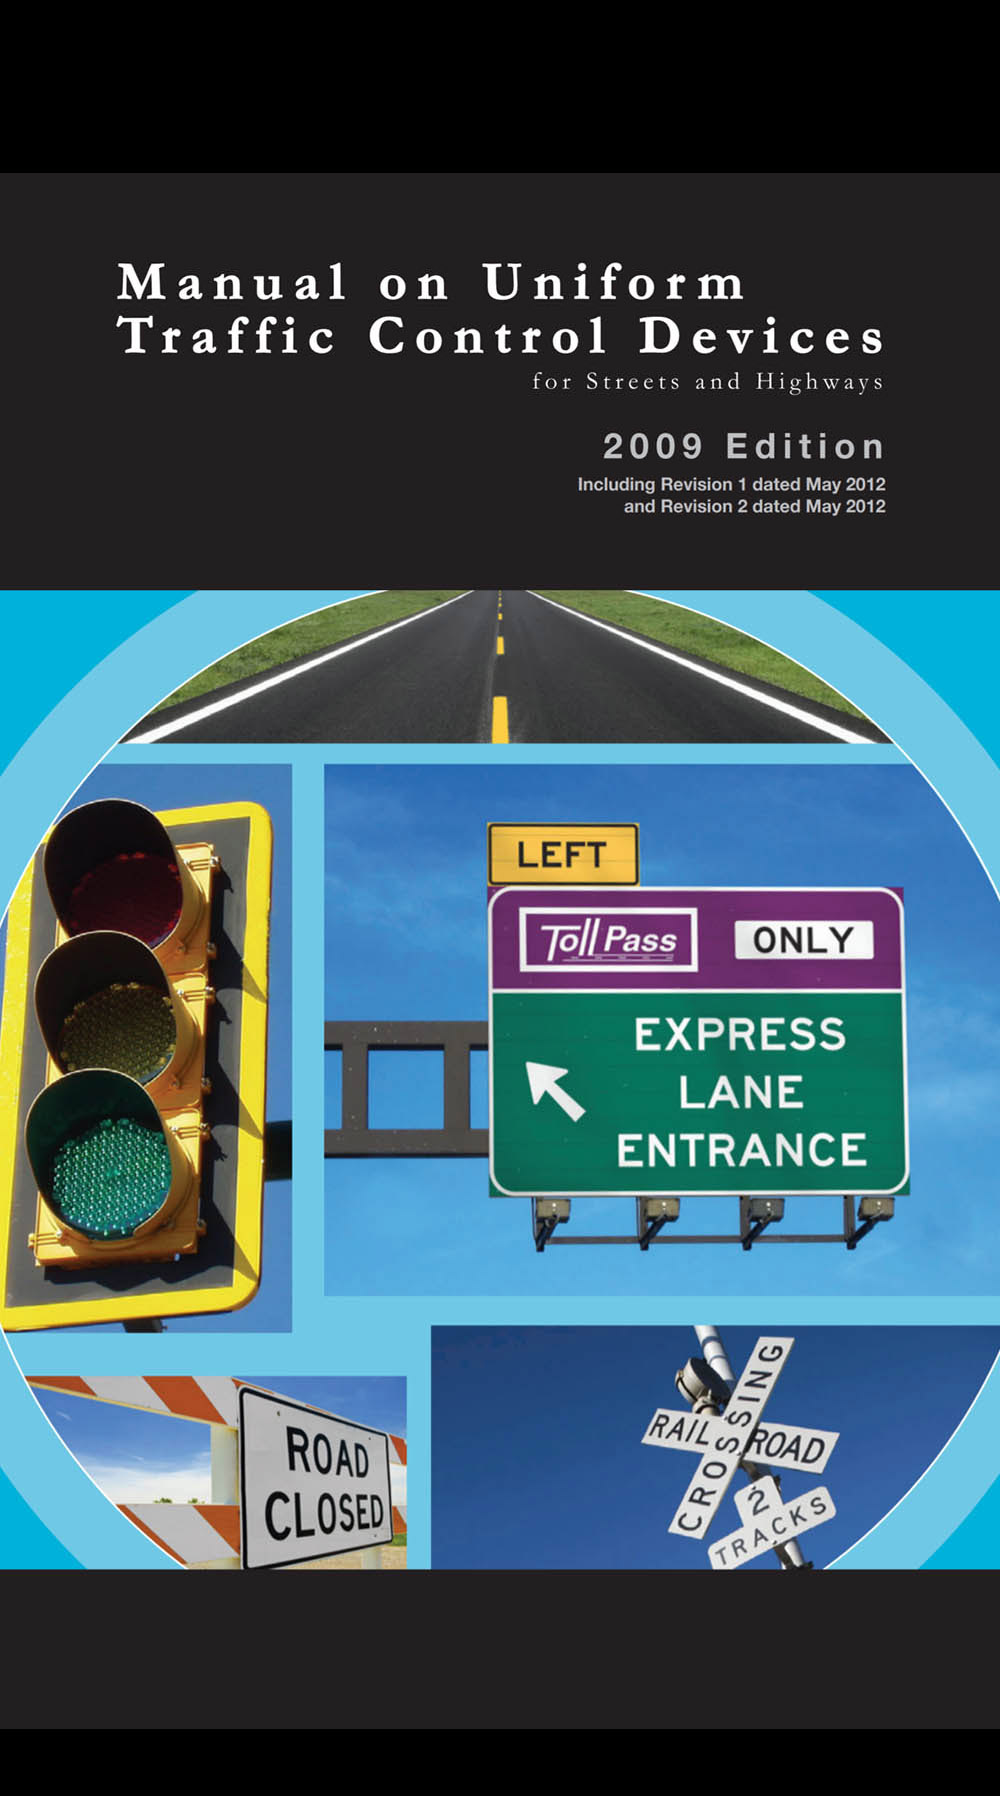 Graphic of the cover of the Manual on Uniform Traffic Control Devices.